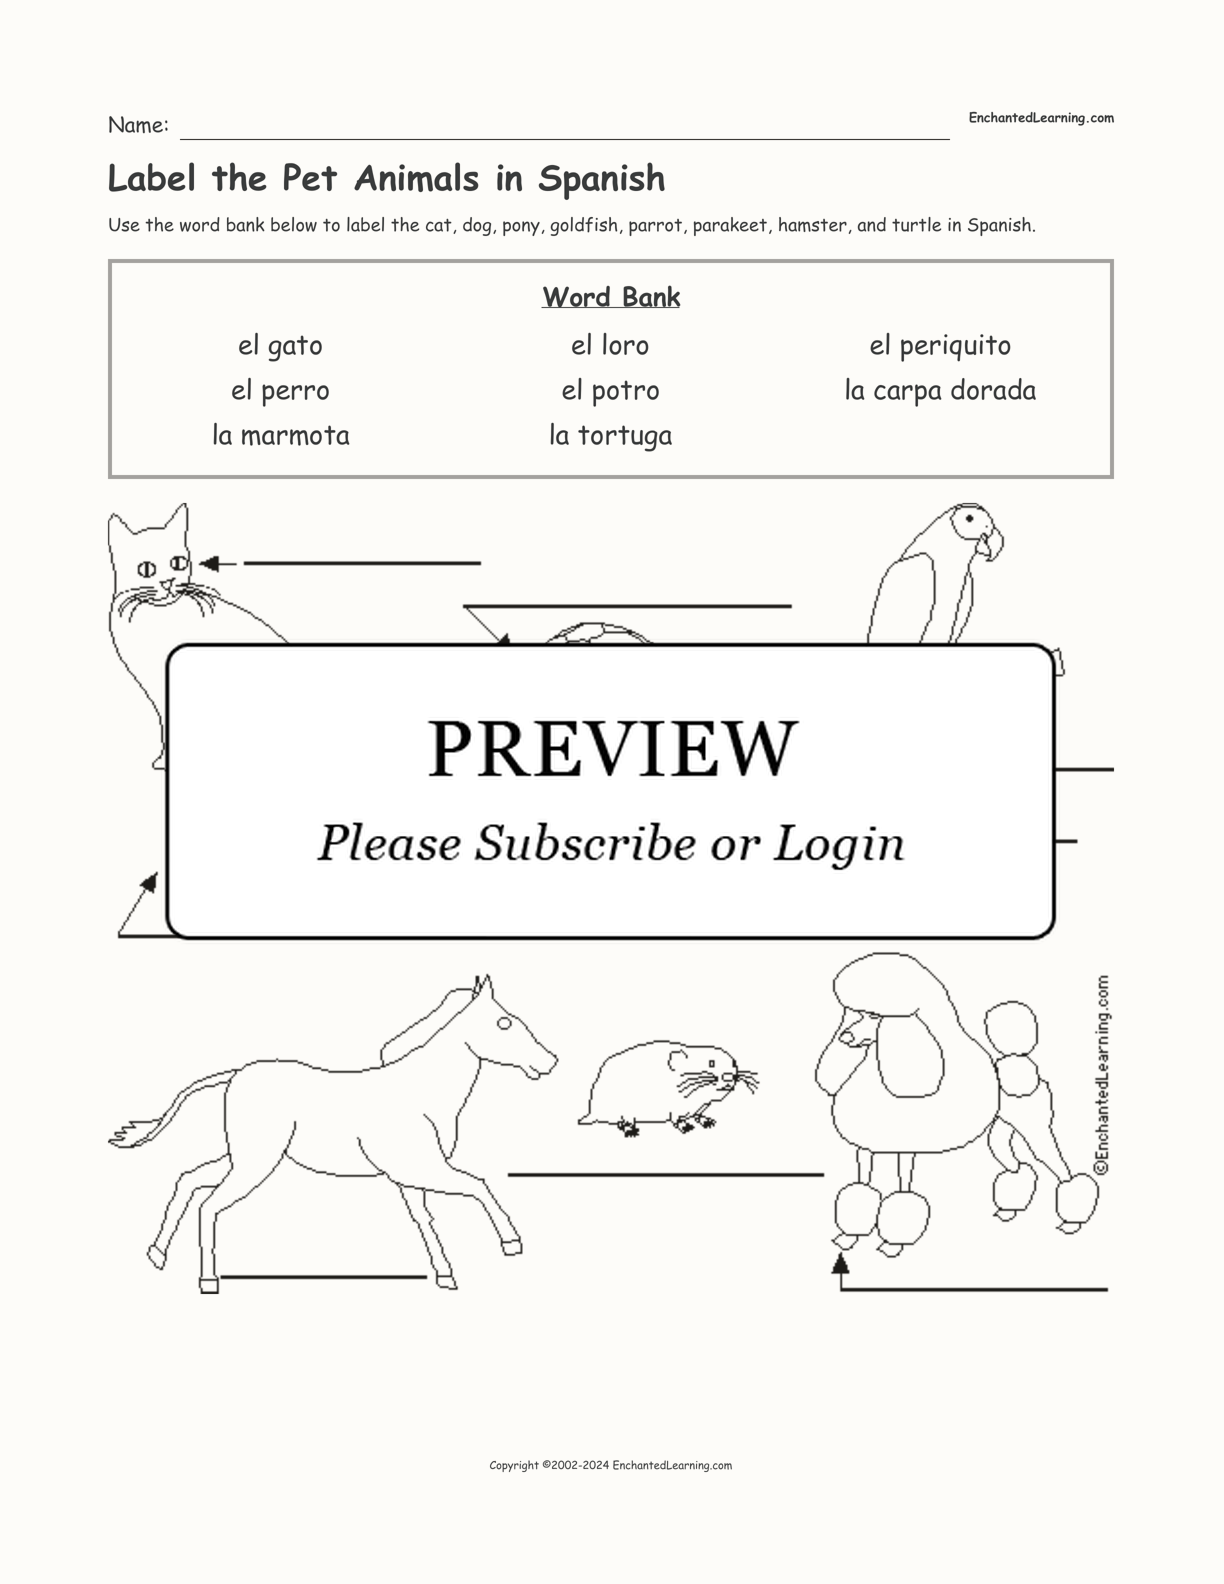 Label the Pet Animals in Spanish interactive worksheet page 1